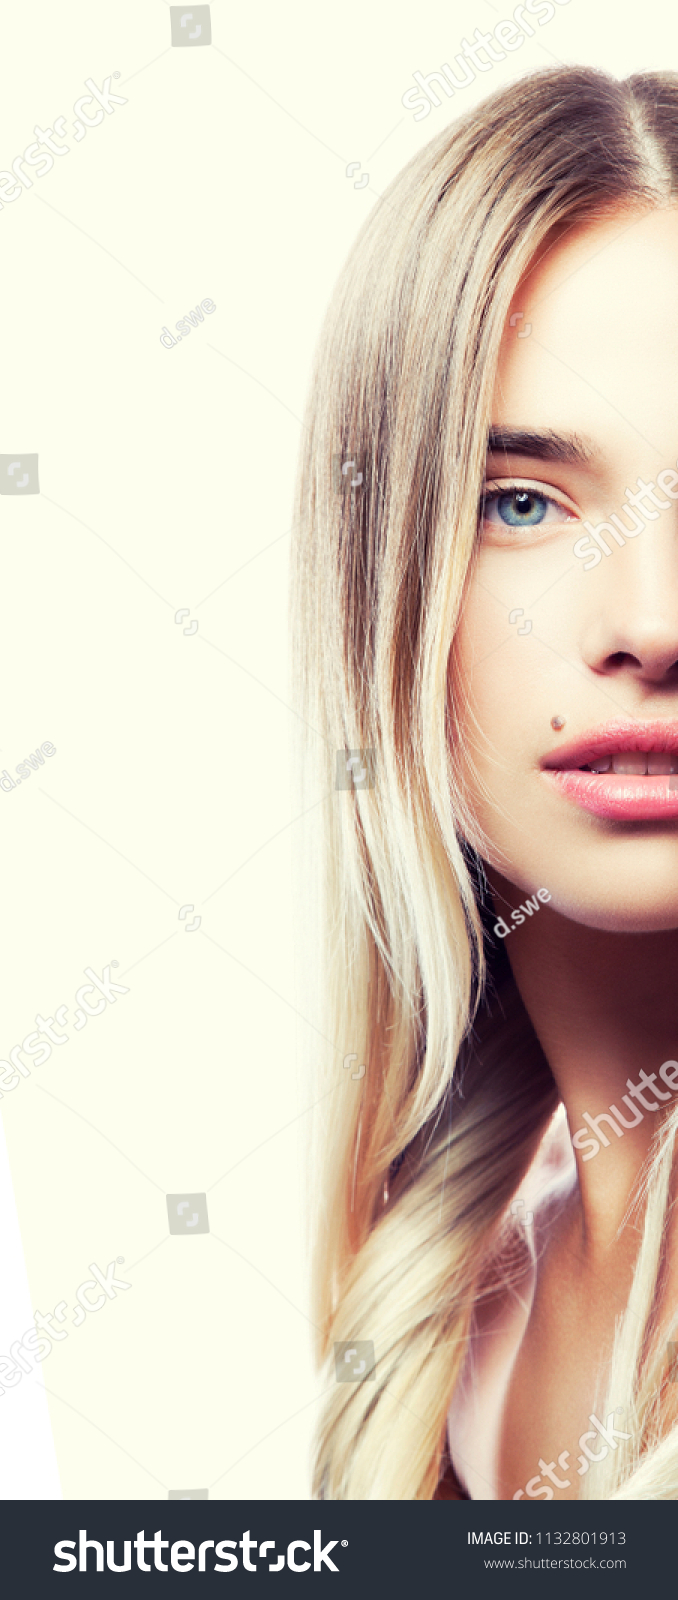 Part Girl Face Blonde Hair Blue Stock Photo Edit Now 1132801913